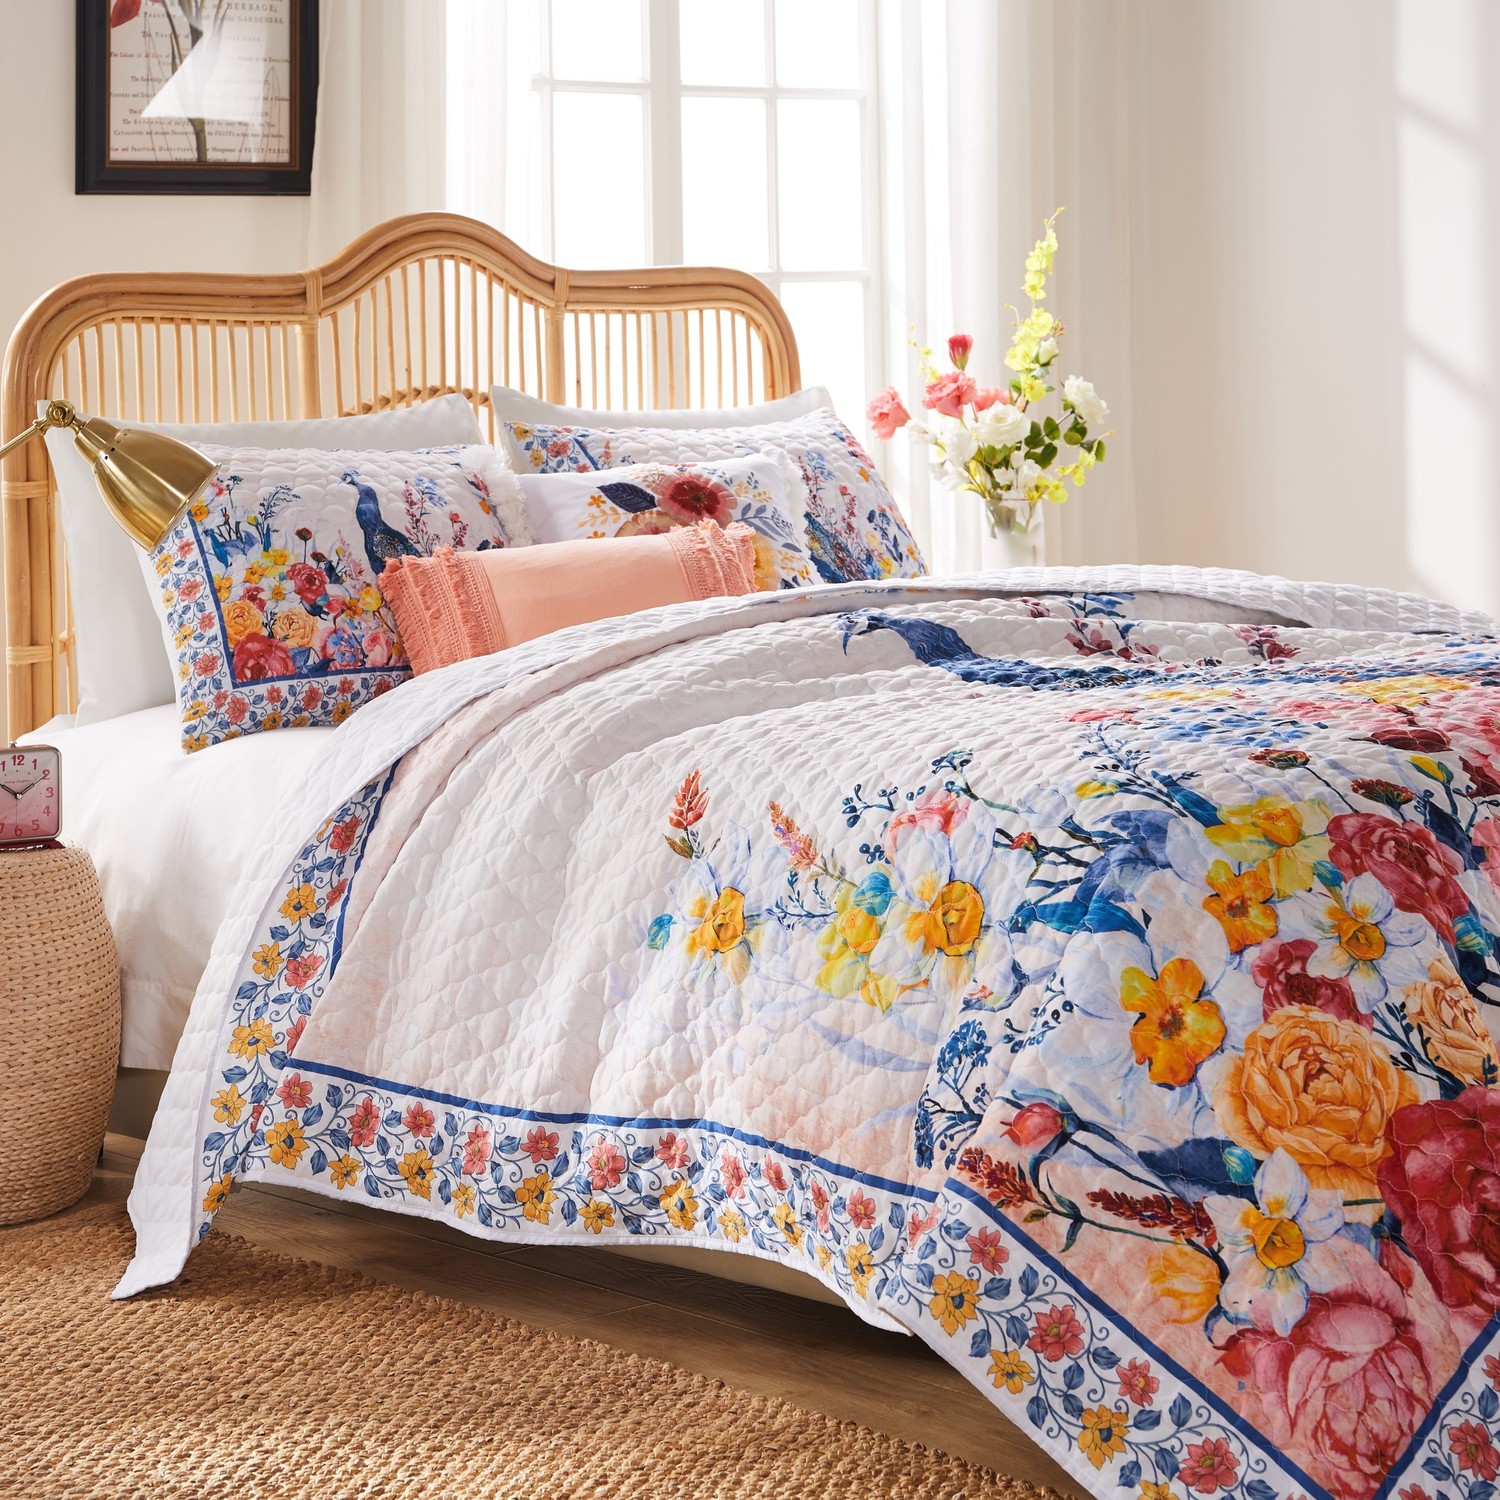 quilted king size comforter Greenland Home Fashions Quilt Set Gold